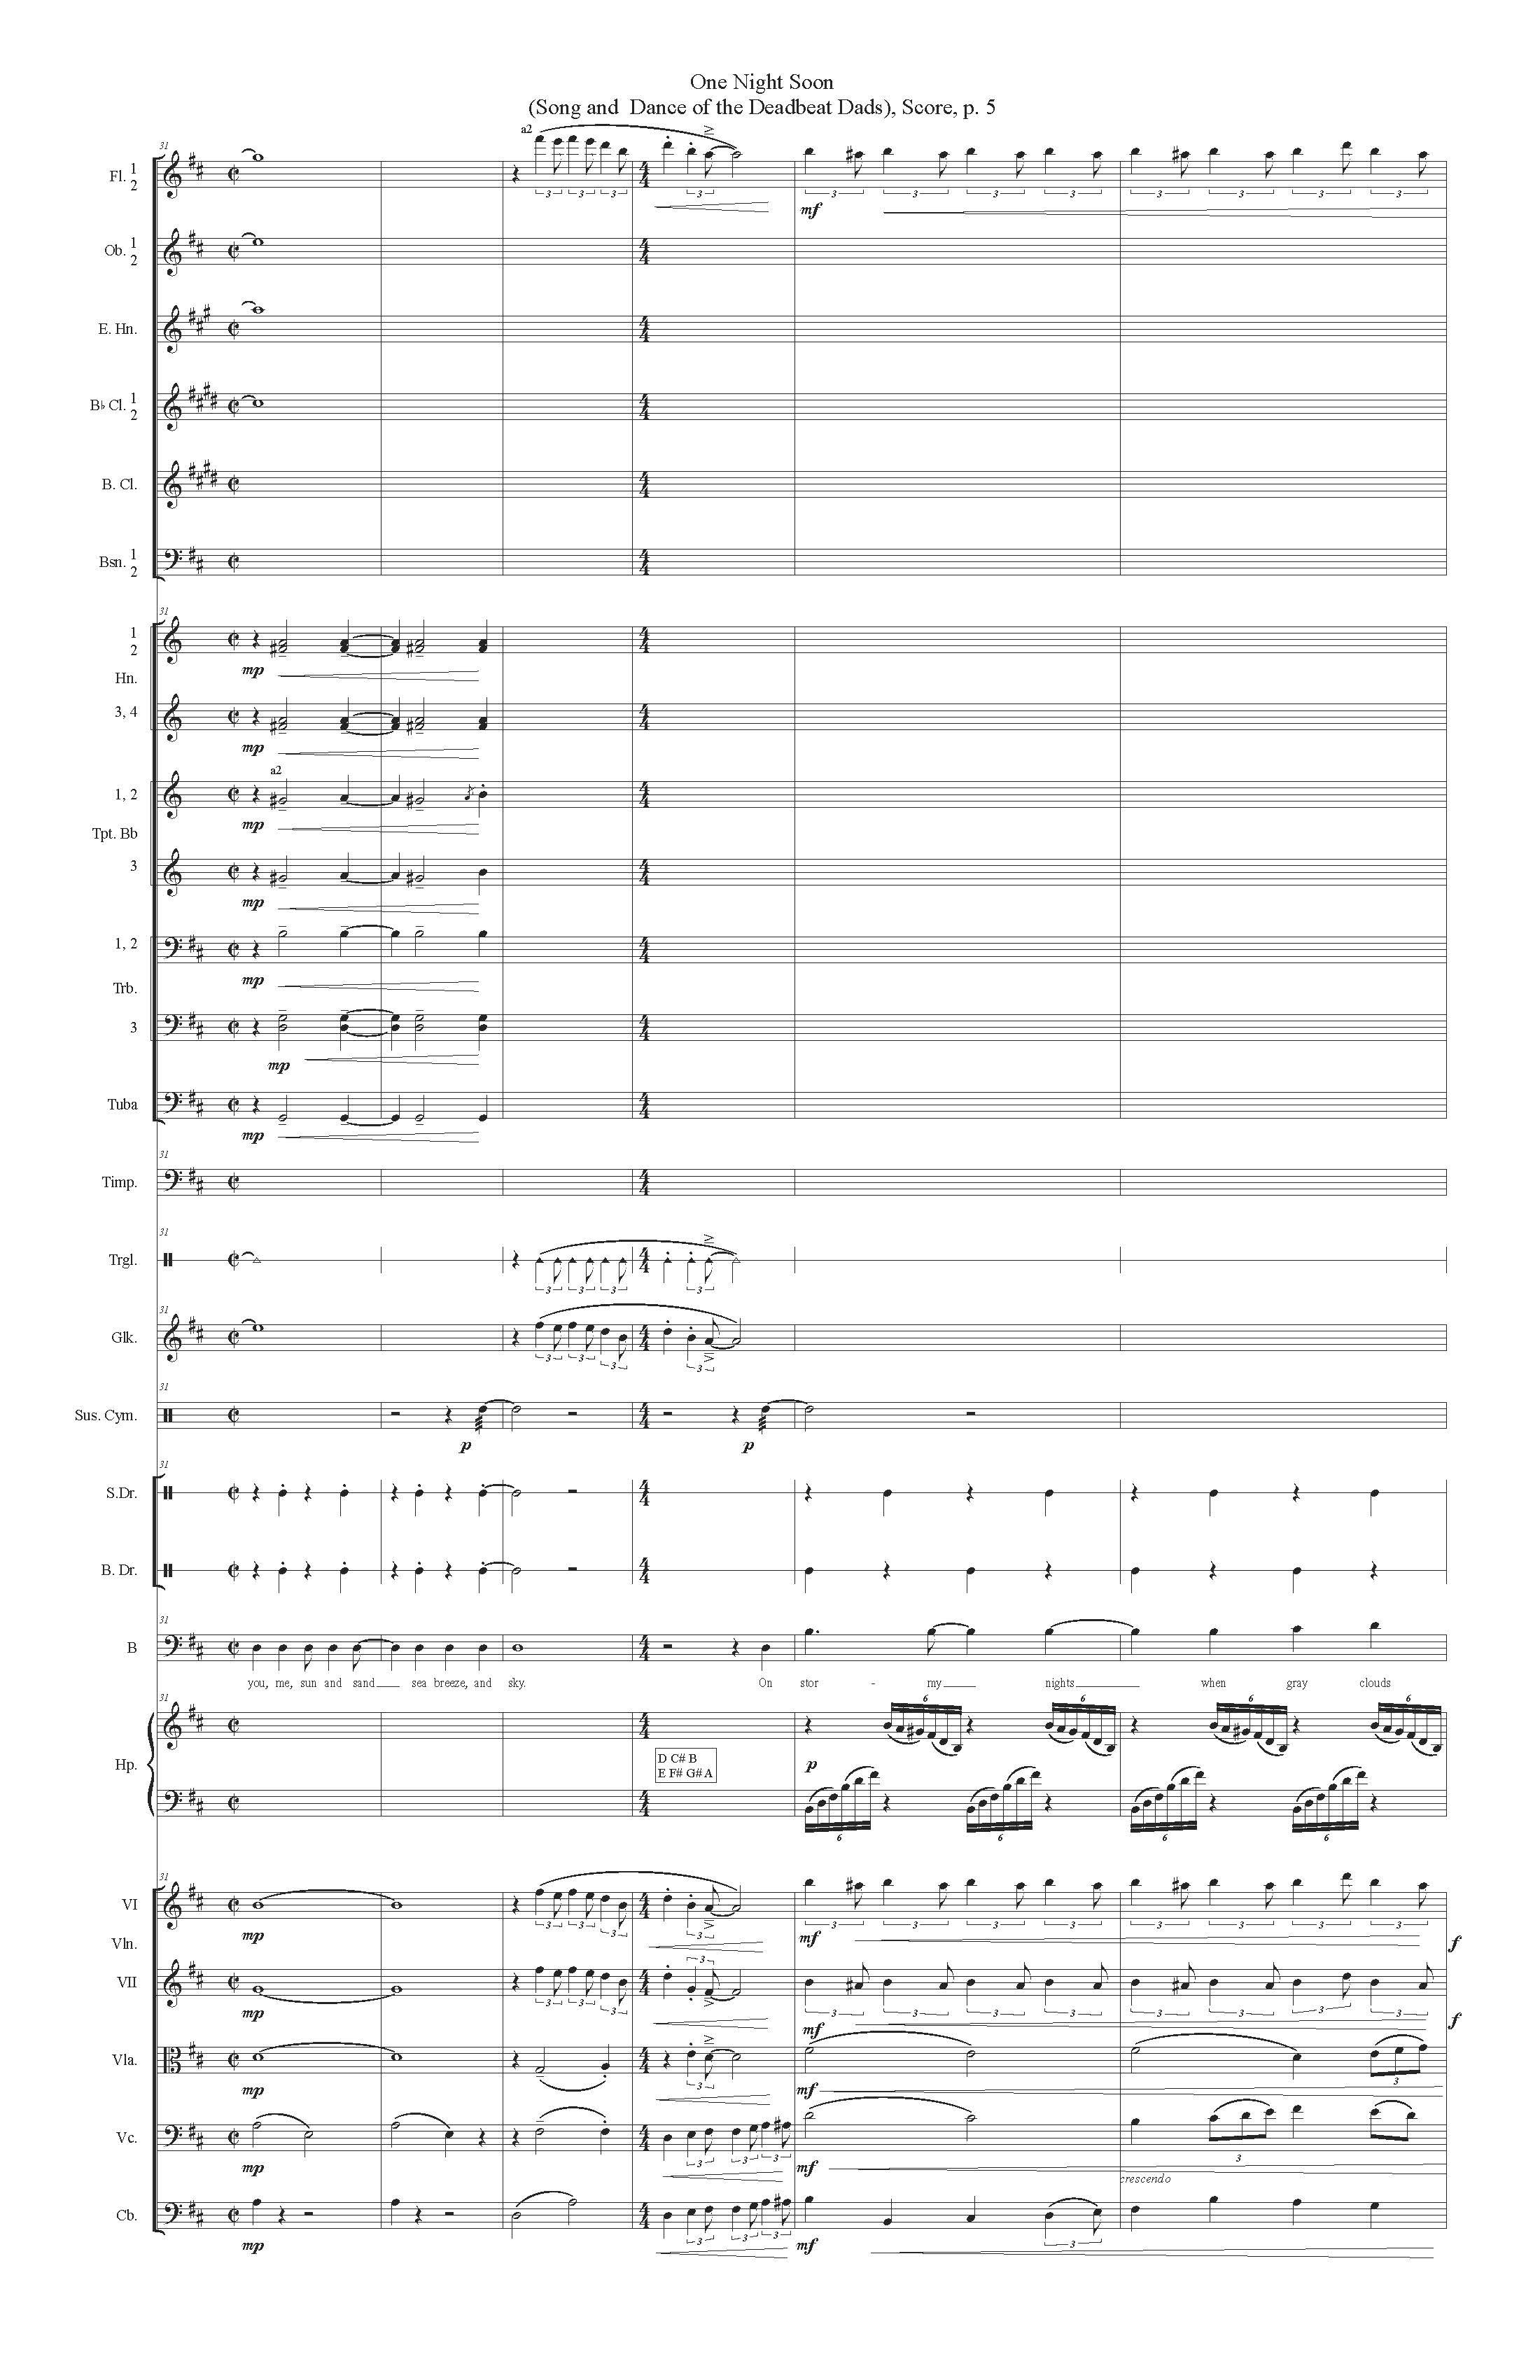 ONE NIGHT SOON ORCH - Score_Page_05.jpg